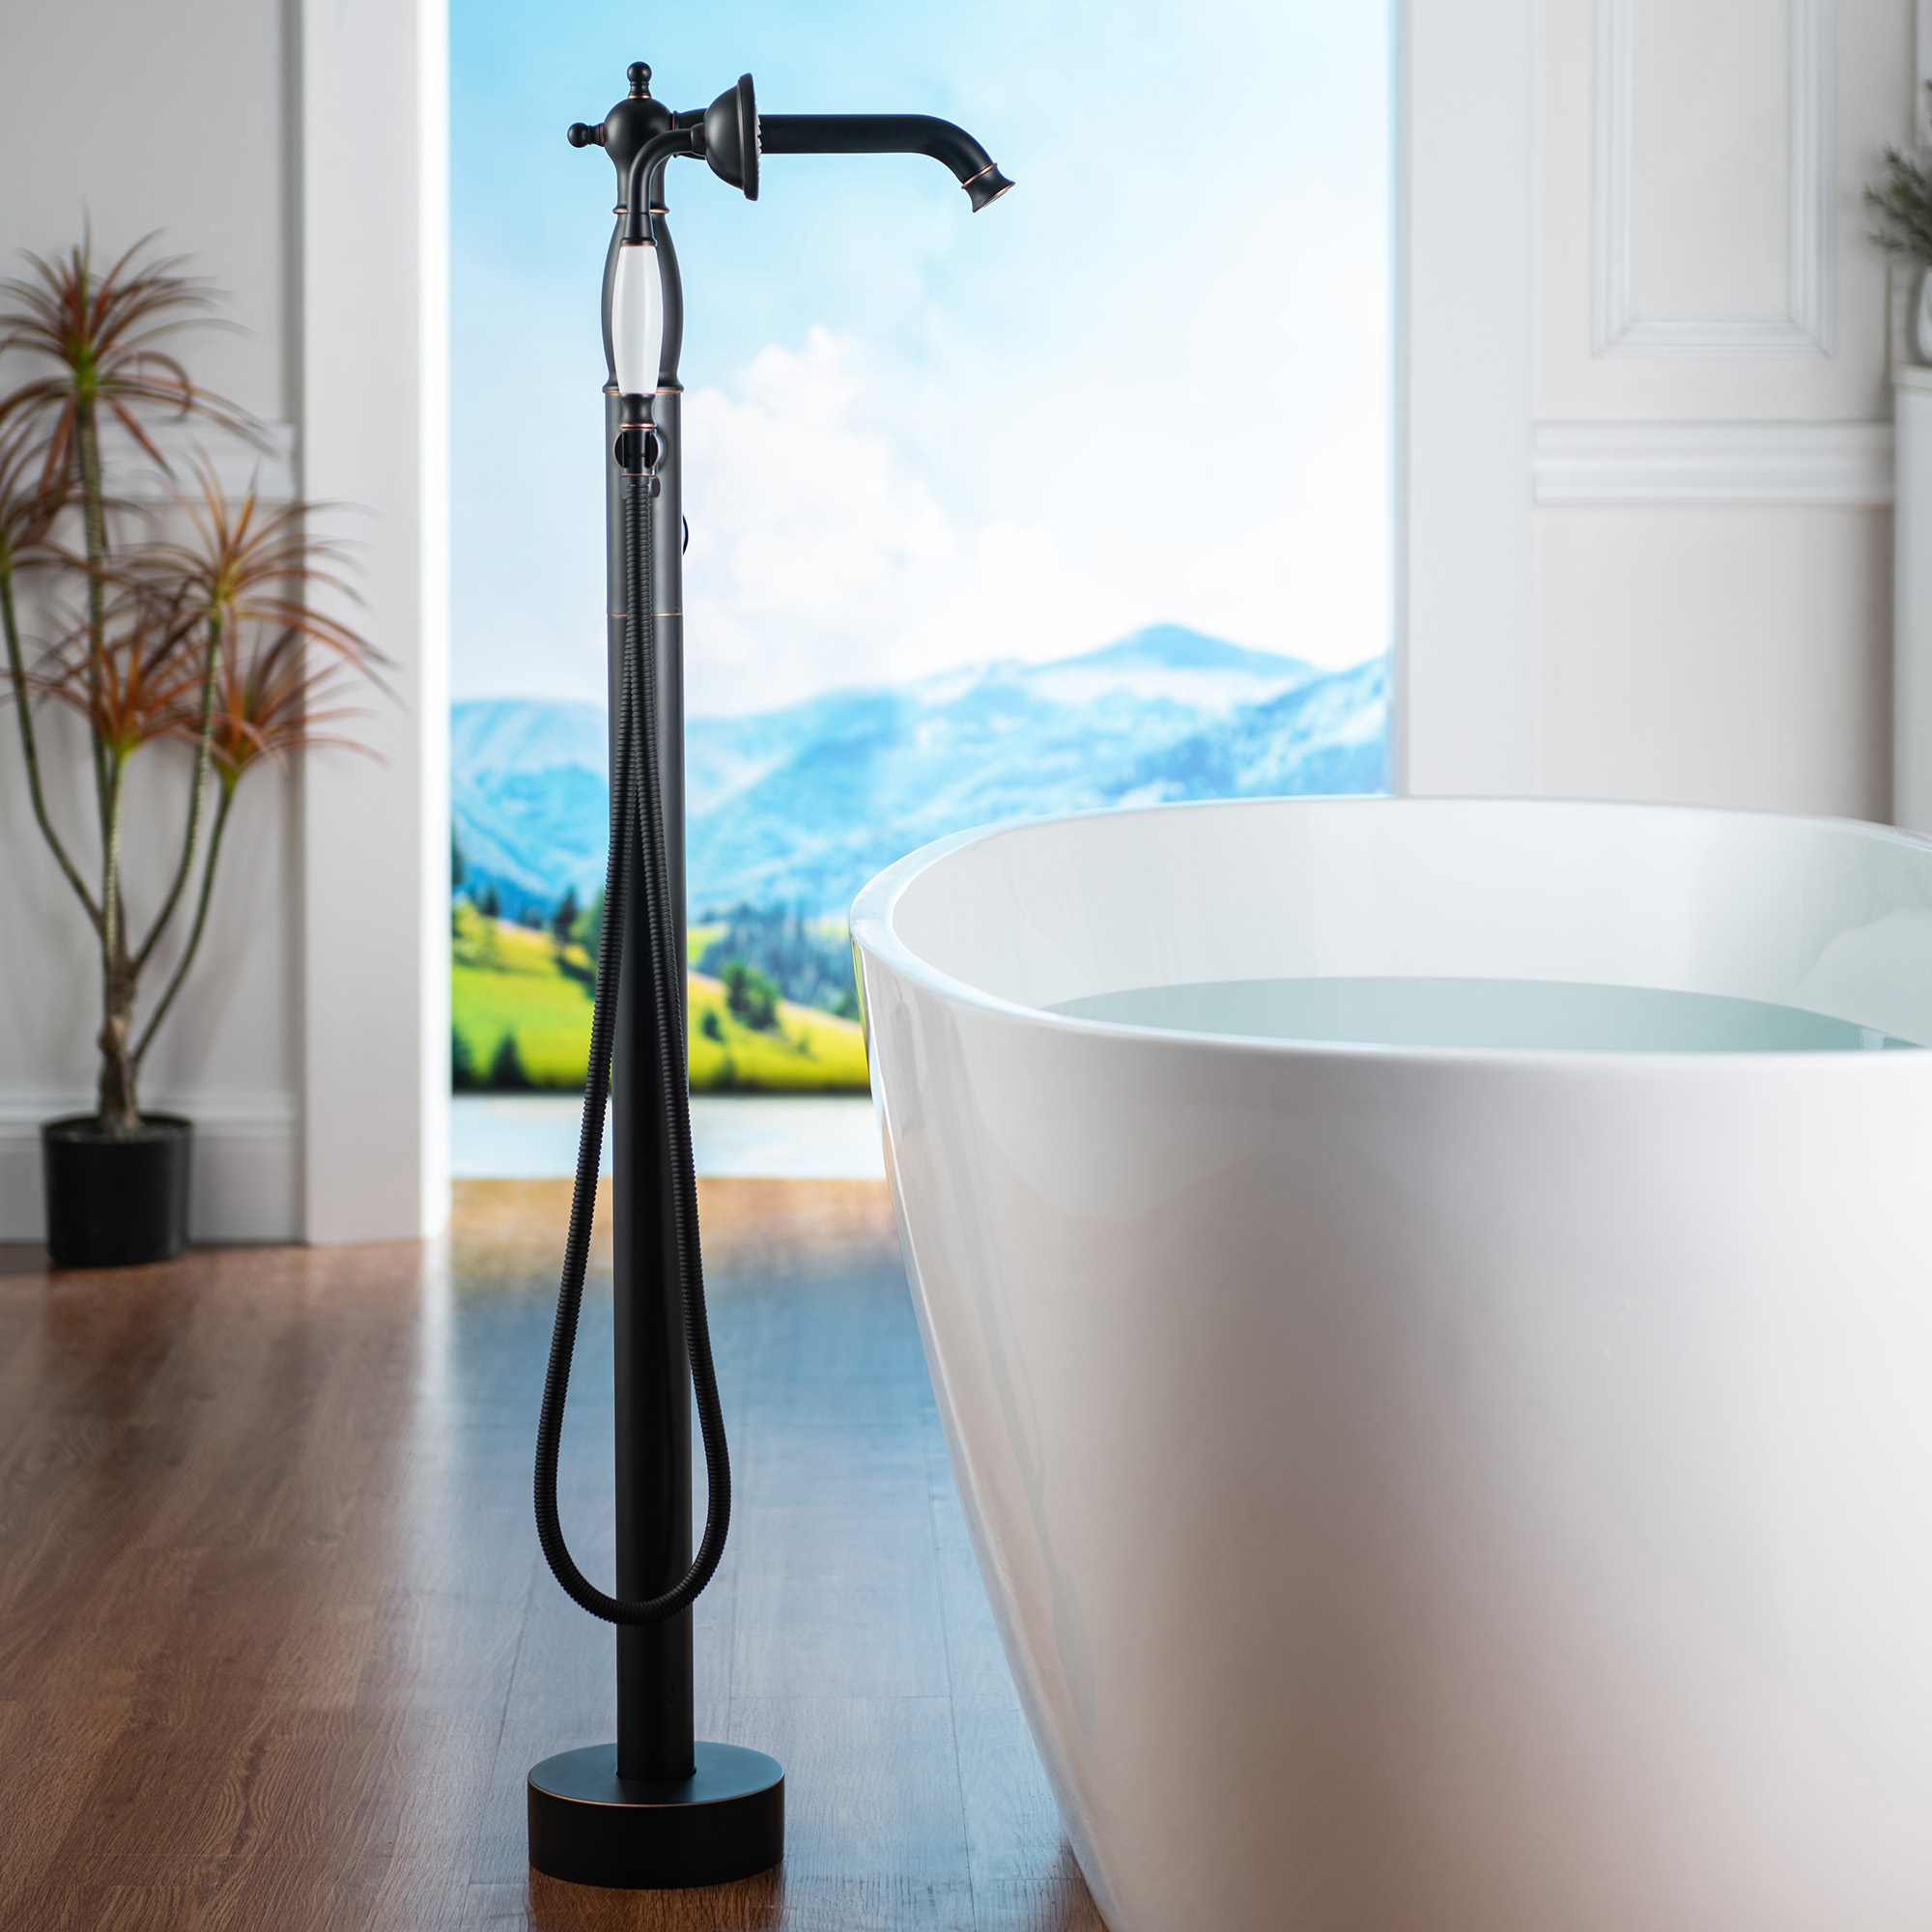  WOODBRIDGE F0049ORB Fusion Single Handle Floor Mount Freestanding Tub Filler Faucet with Telephone Hand shower in Oil Rubbed Bronze Finish_12280